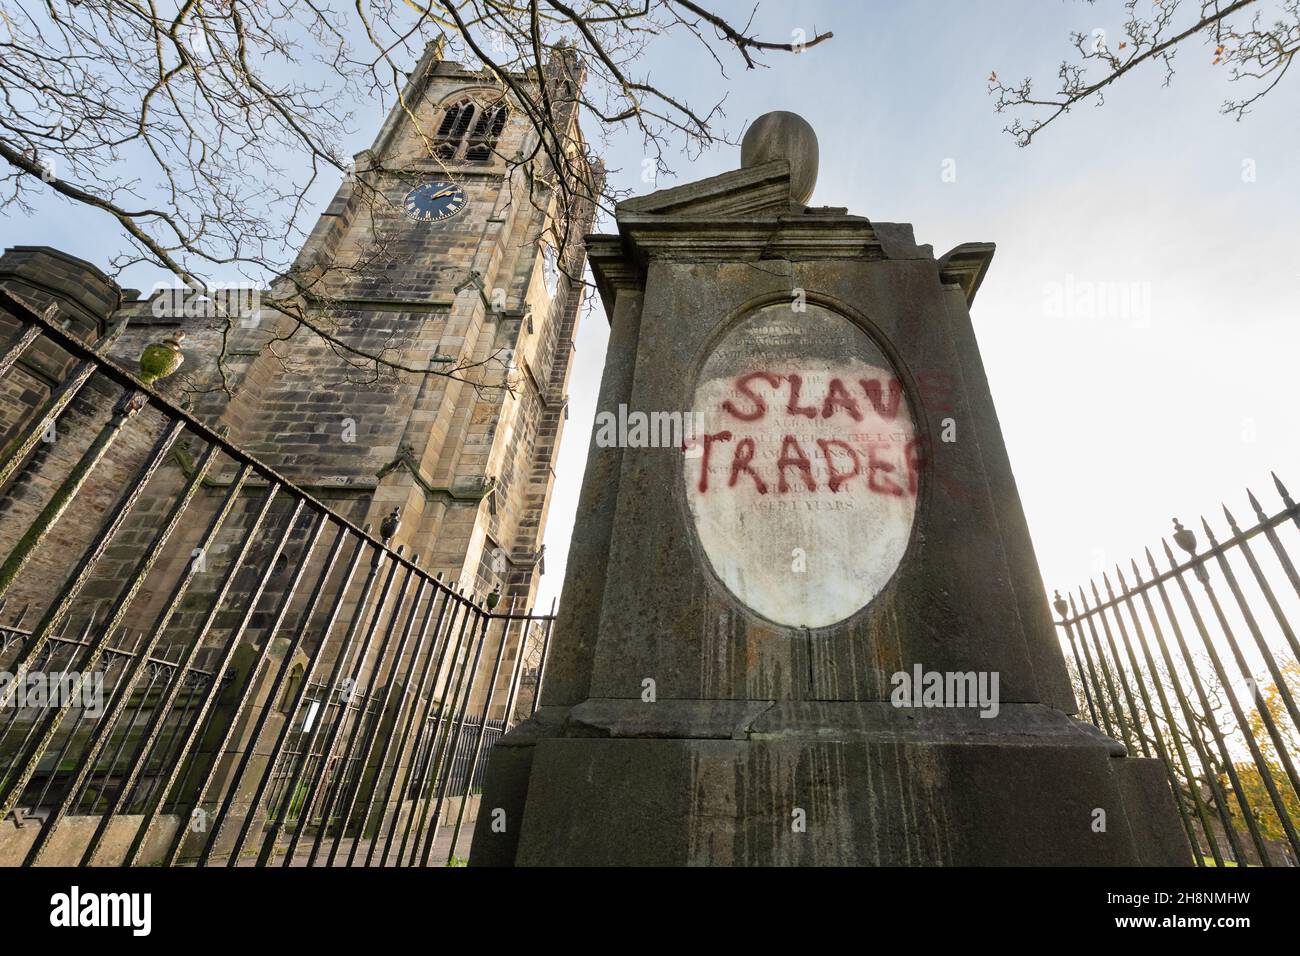 Black lives matter - Rawlinson family monument was defaced with 'Slave Trader' in 2020 - Lancaster Priory Church, Lancaster, Lancashire, England, UK Stock Photo